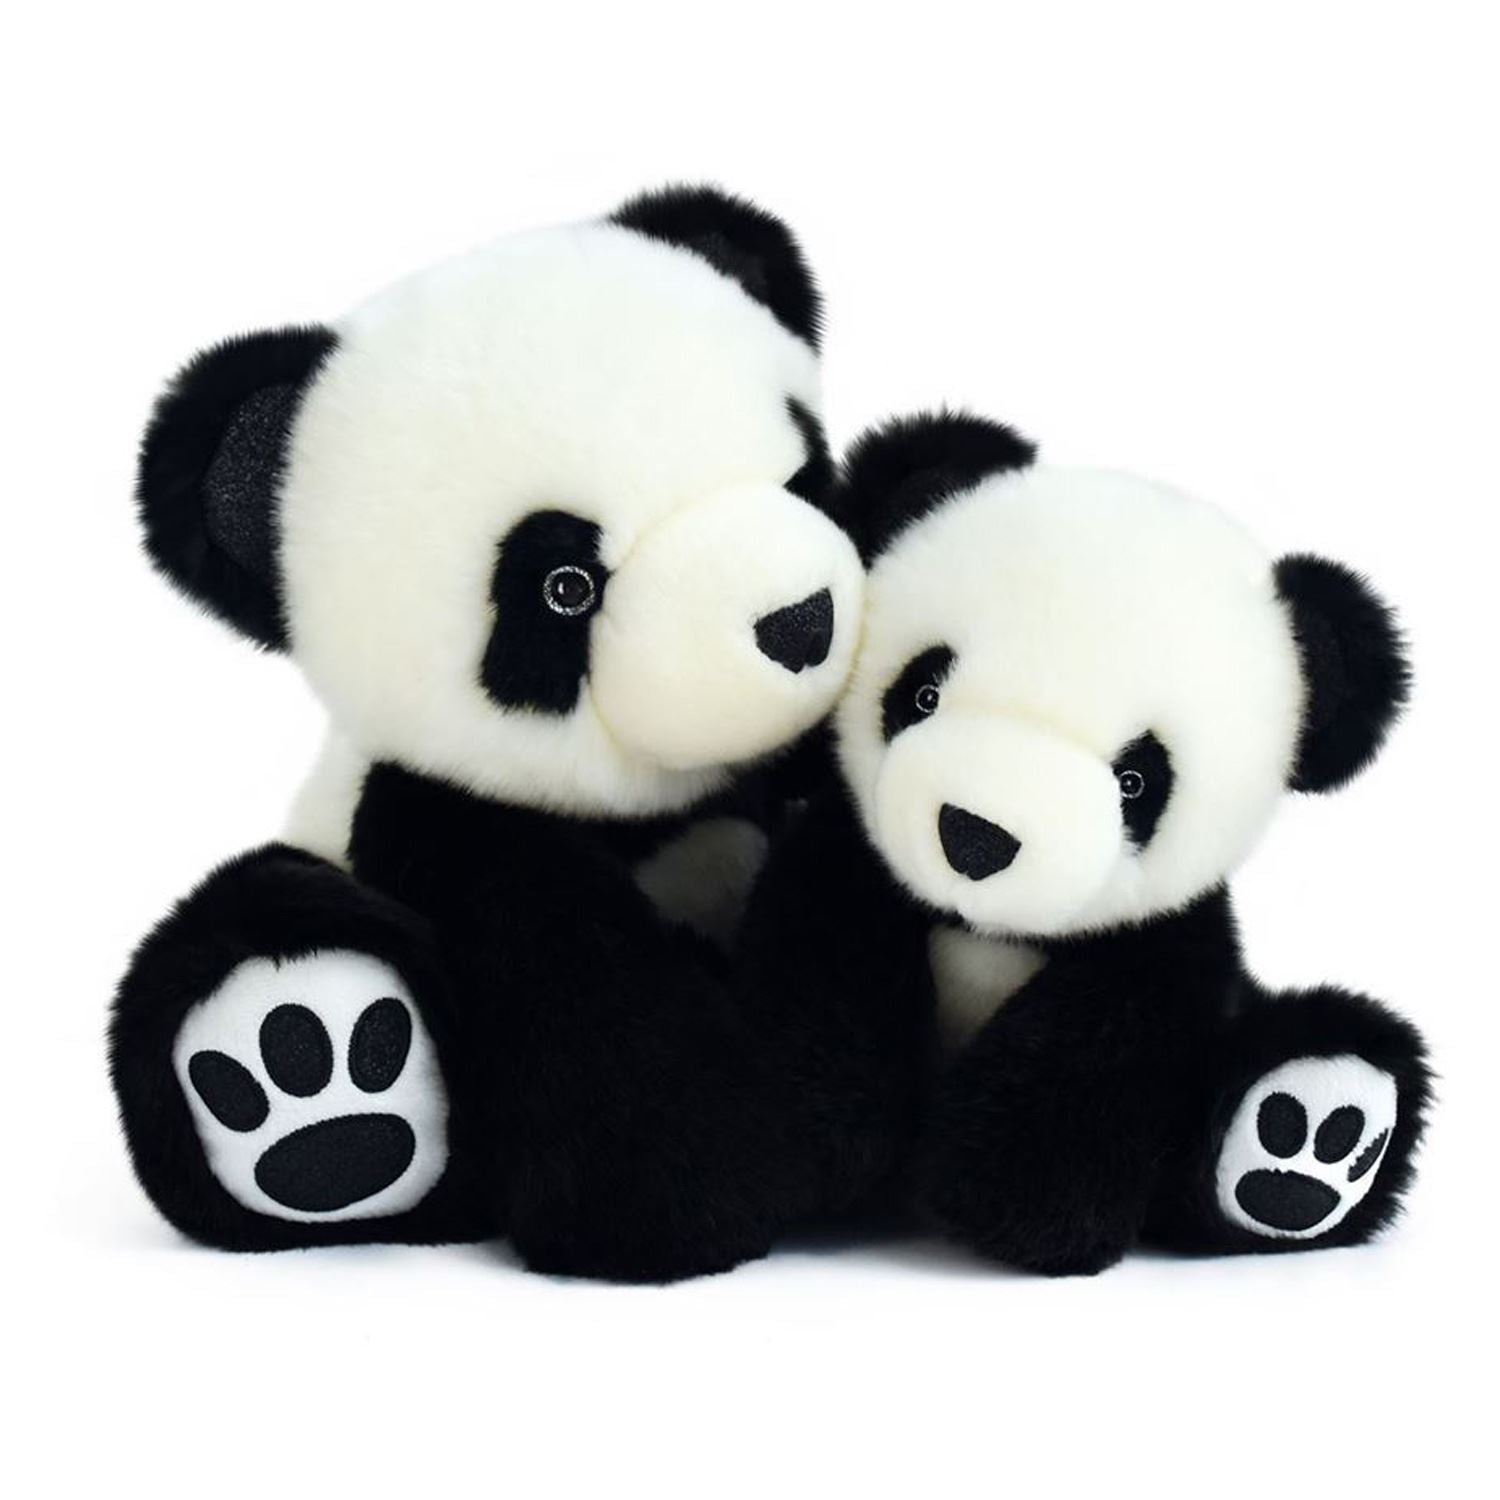 Histoire d'Ours - Hight quality stuffed animals and plush